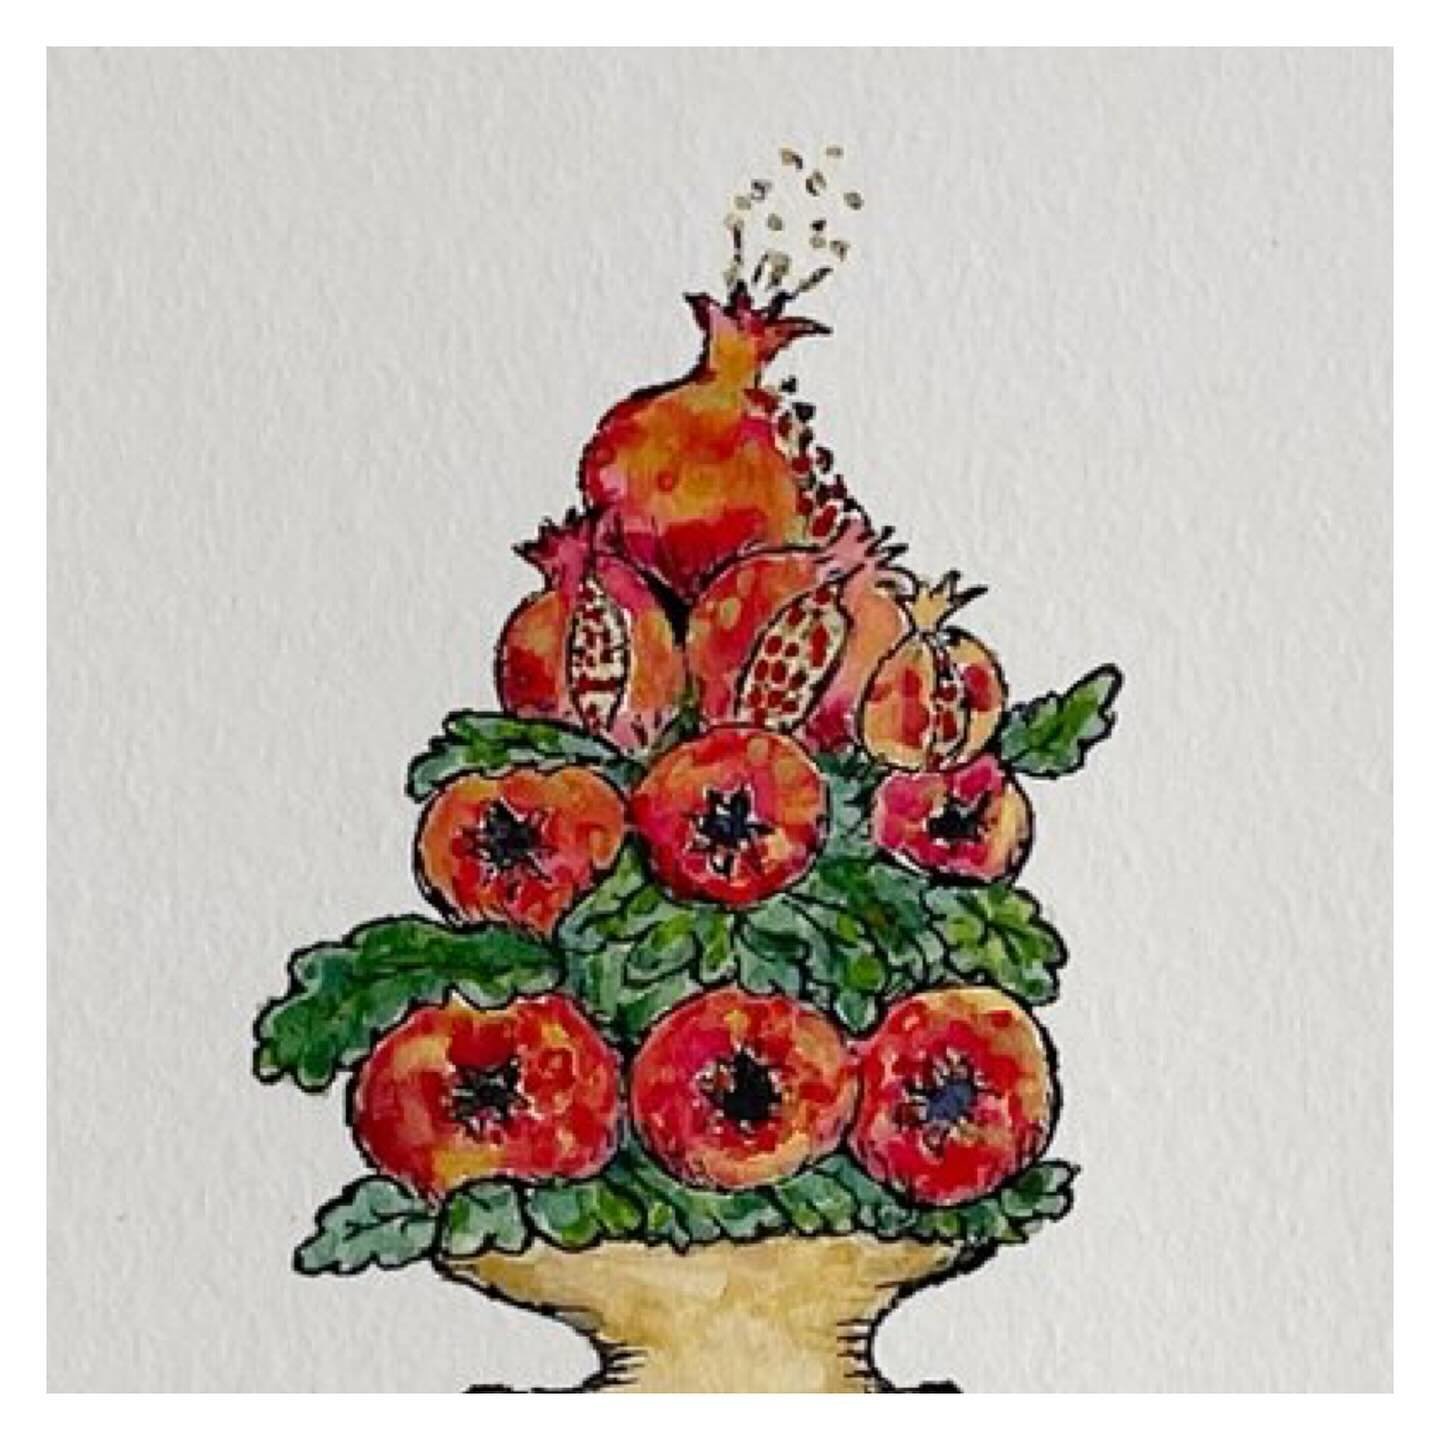 The Pomegranate 
Hand-painted in Provence. 21 April 2024. 

Signed by the artist on the back. 

Masterwork line drawing,  illustrated by the artist. Pen on cold press 300gsm  fine paper. Printed and handpainted with watercolour. 

Features: The highl